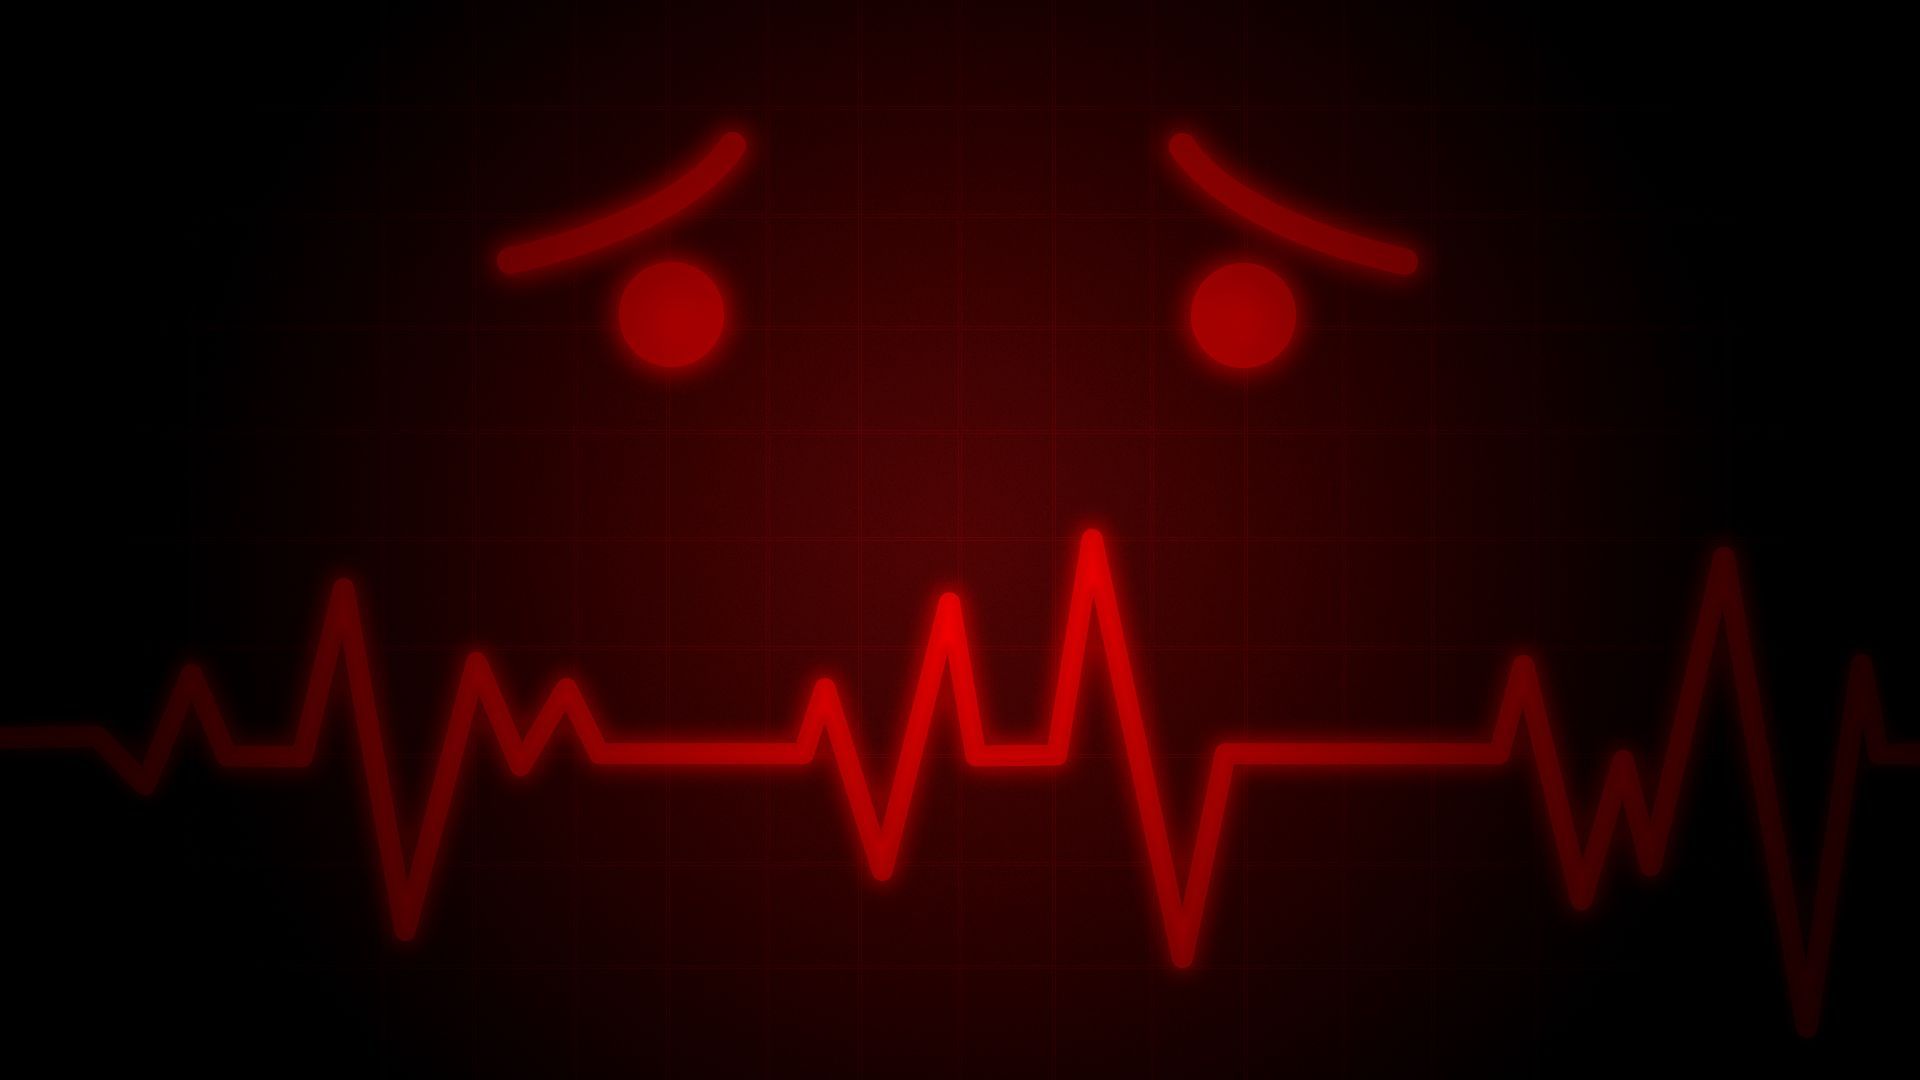 Illustration of a grimacing face on an EKG monitor.